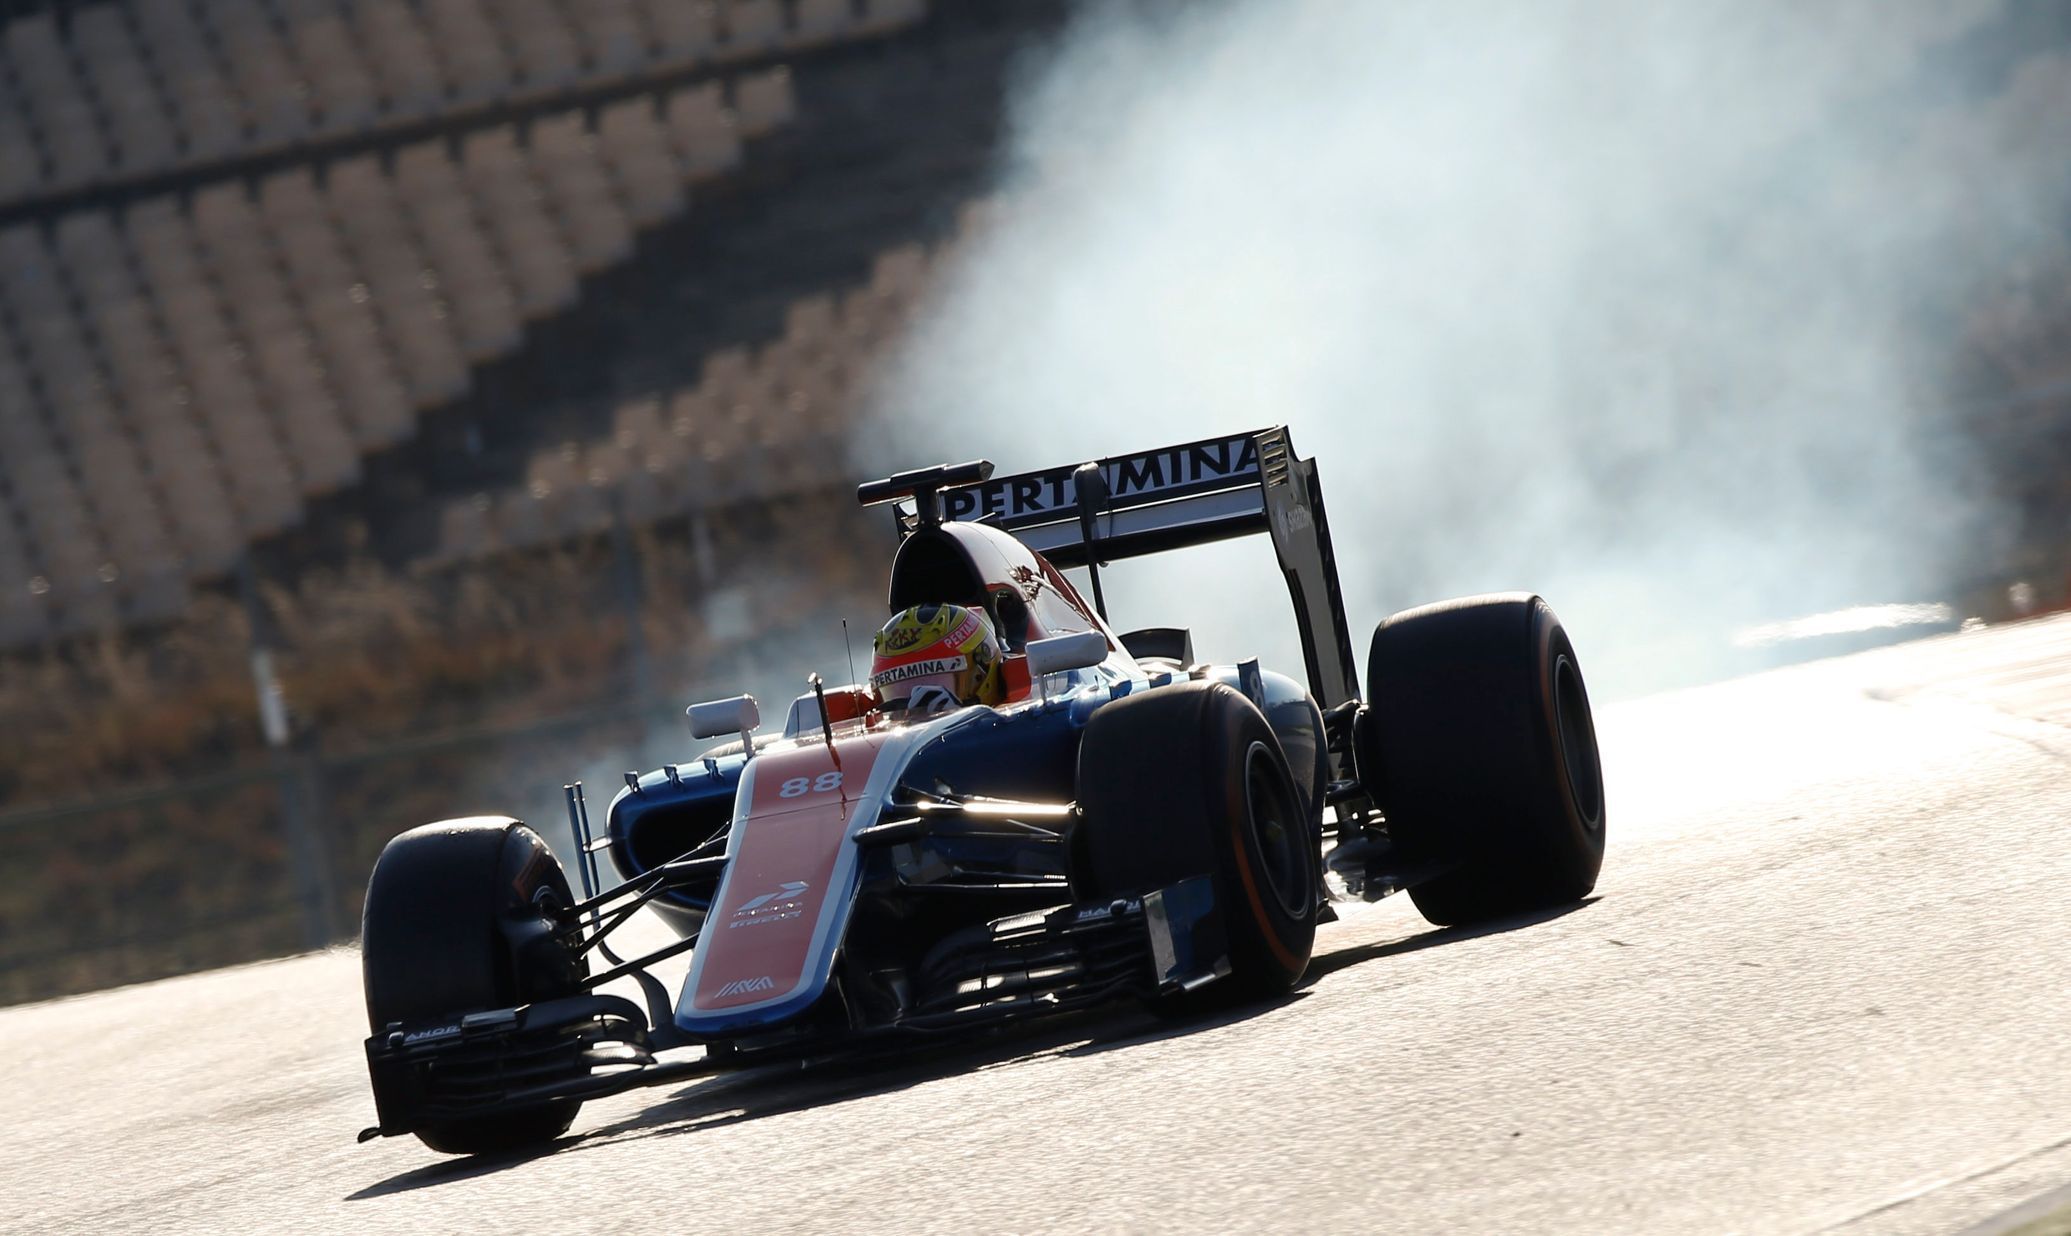 Tyres smoke as Manor Racing Formula One driver Haryanto of Indonesia takes a curve with his car during the third testing session ahead of the upcoming season at the Circuit Barcelona-Catalunya in Mont